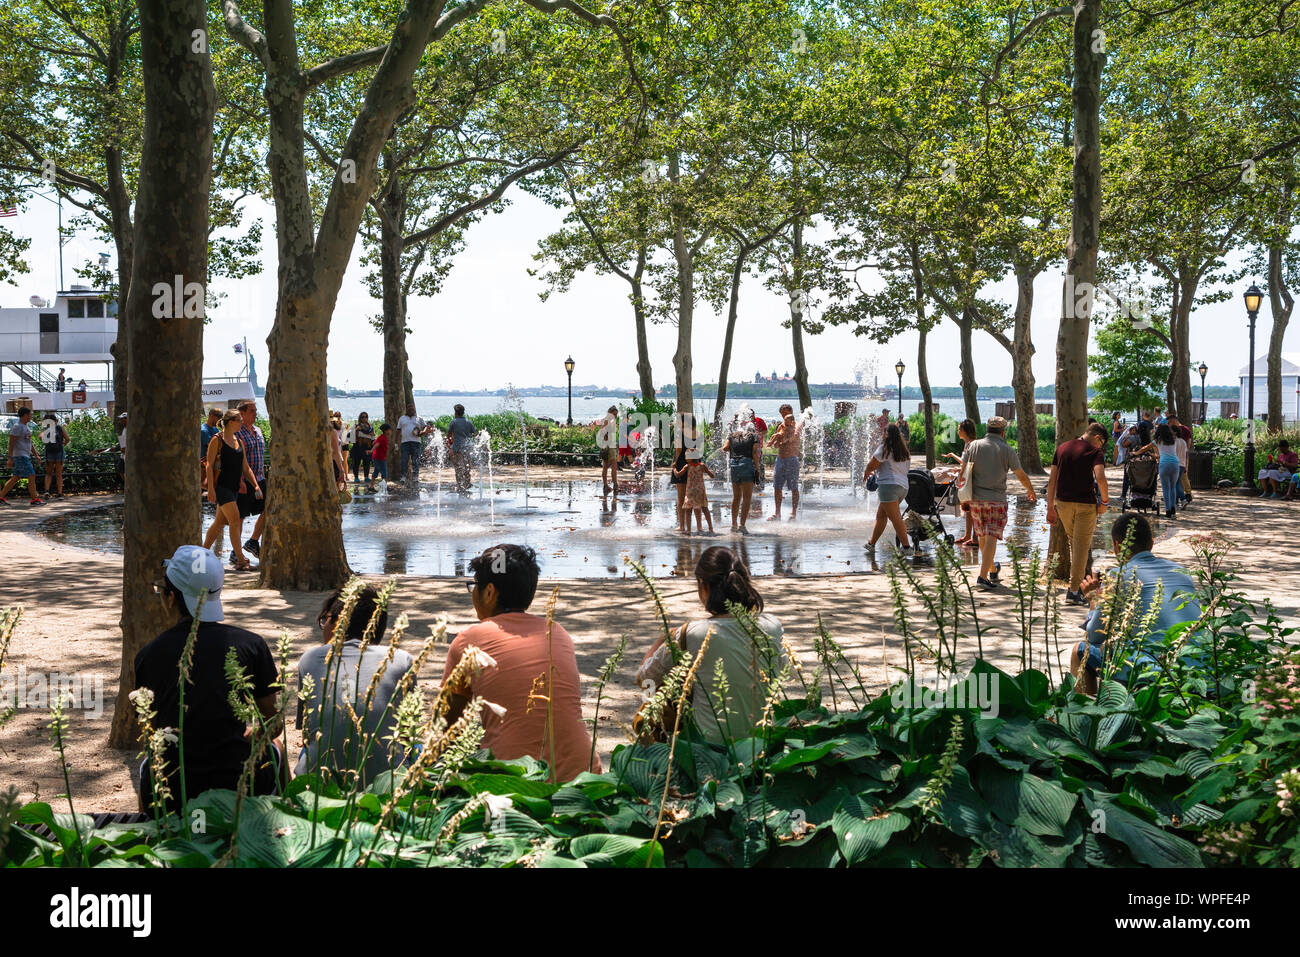 Battery Park New York, view in summer of people enjoying the water jet feature in Battery Park, Lower Manhattan, New York City, USA Stock Photo